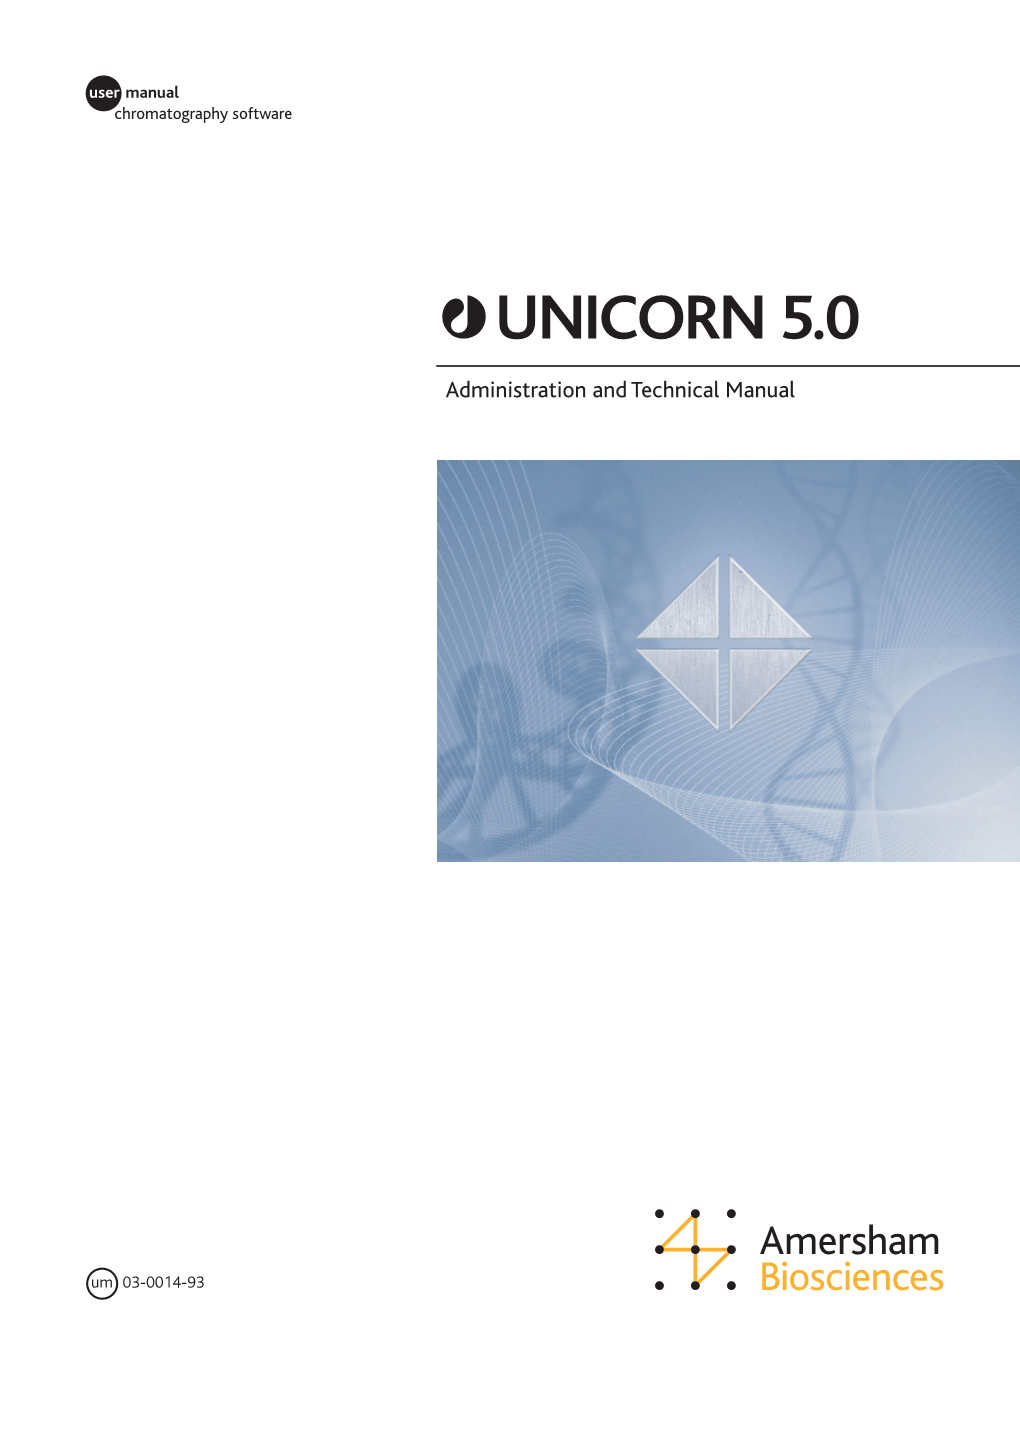 UNICORN 5.0 Administration and Technical Manual 03-0014-93 Edition AC 2004-03